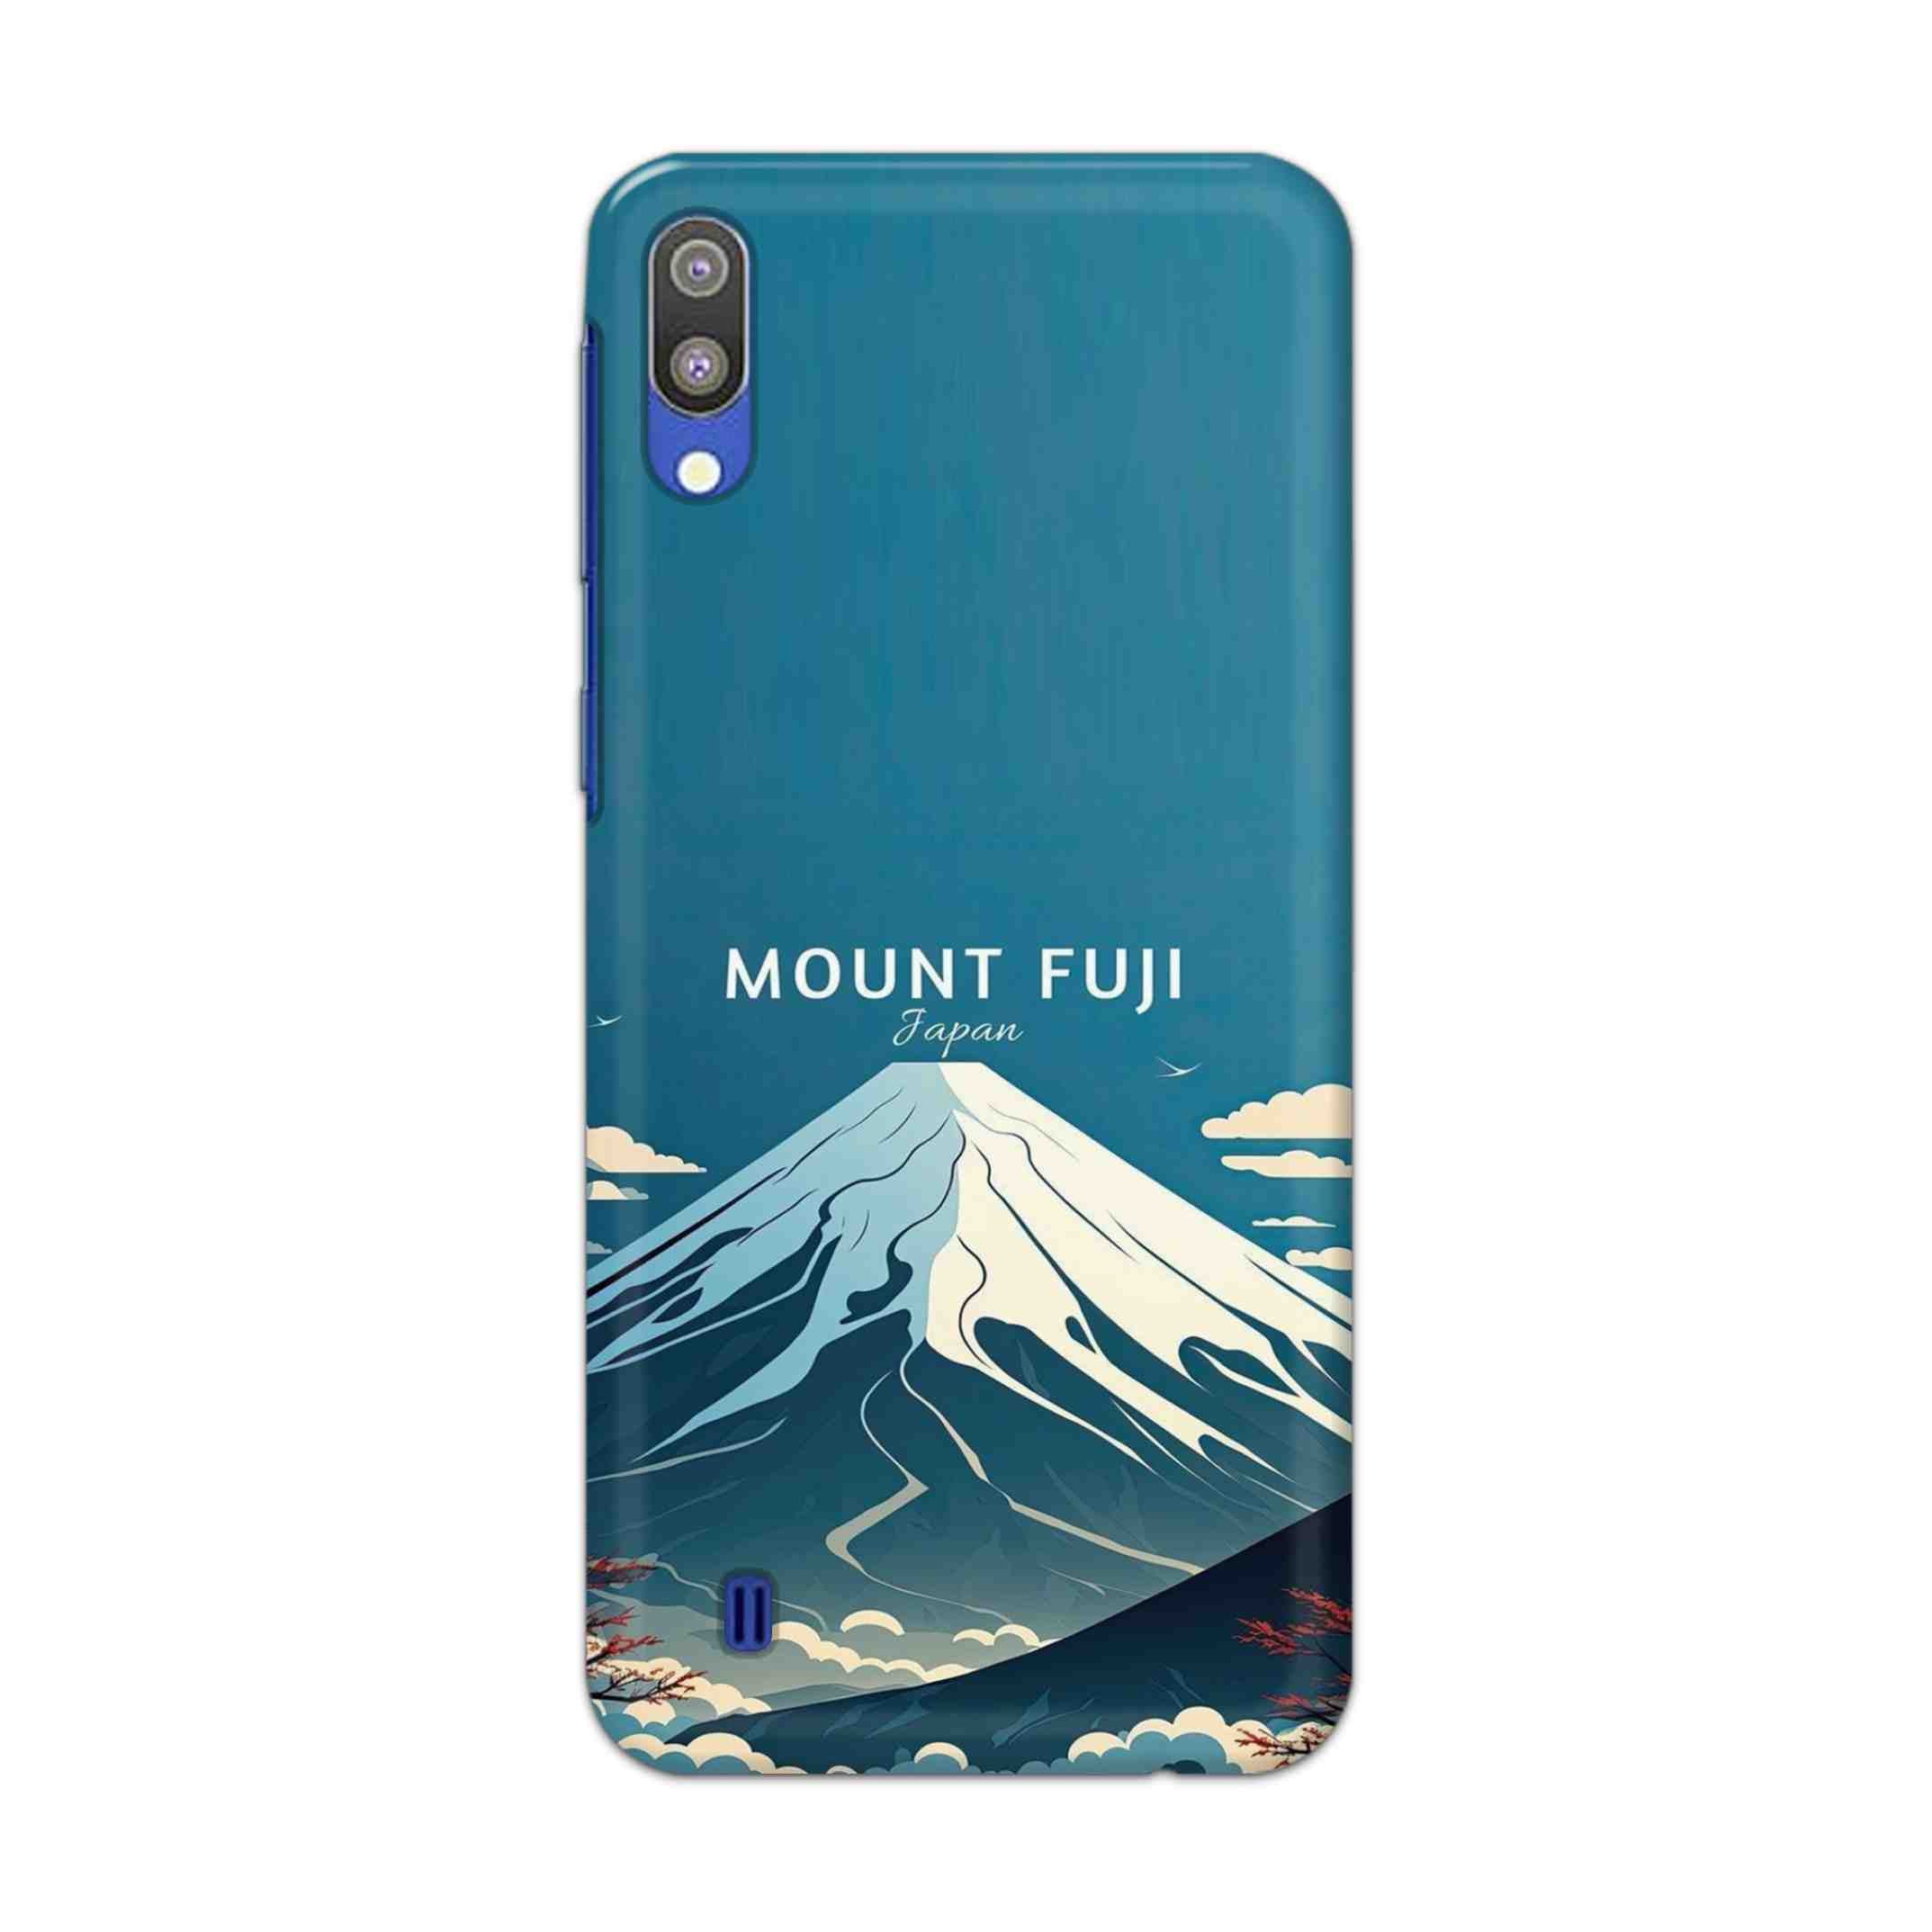 Buy Mount Fuji Hard Back Mobile Phone Case Cover For Samsung Galaxy M10 Online